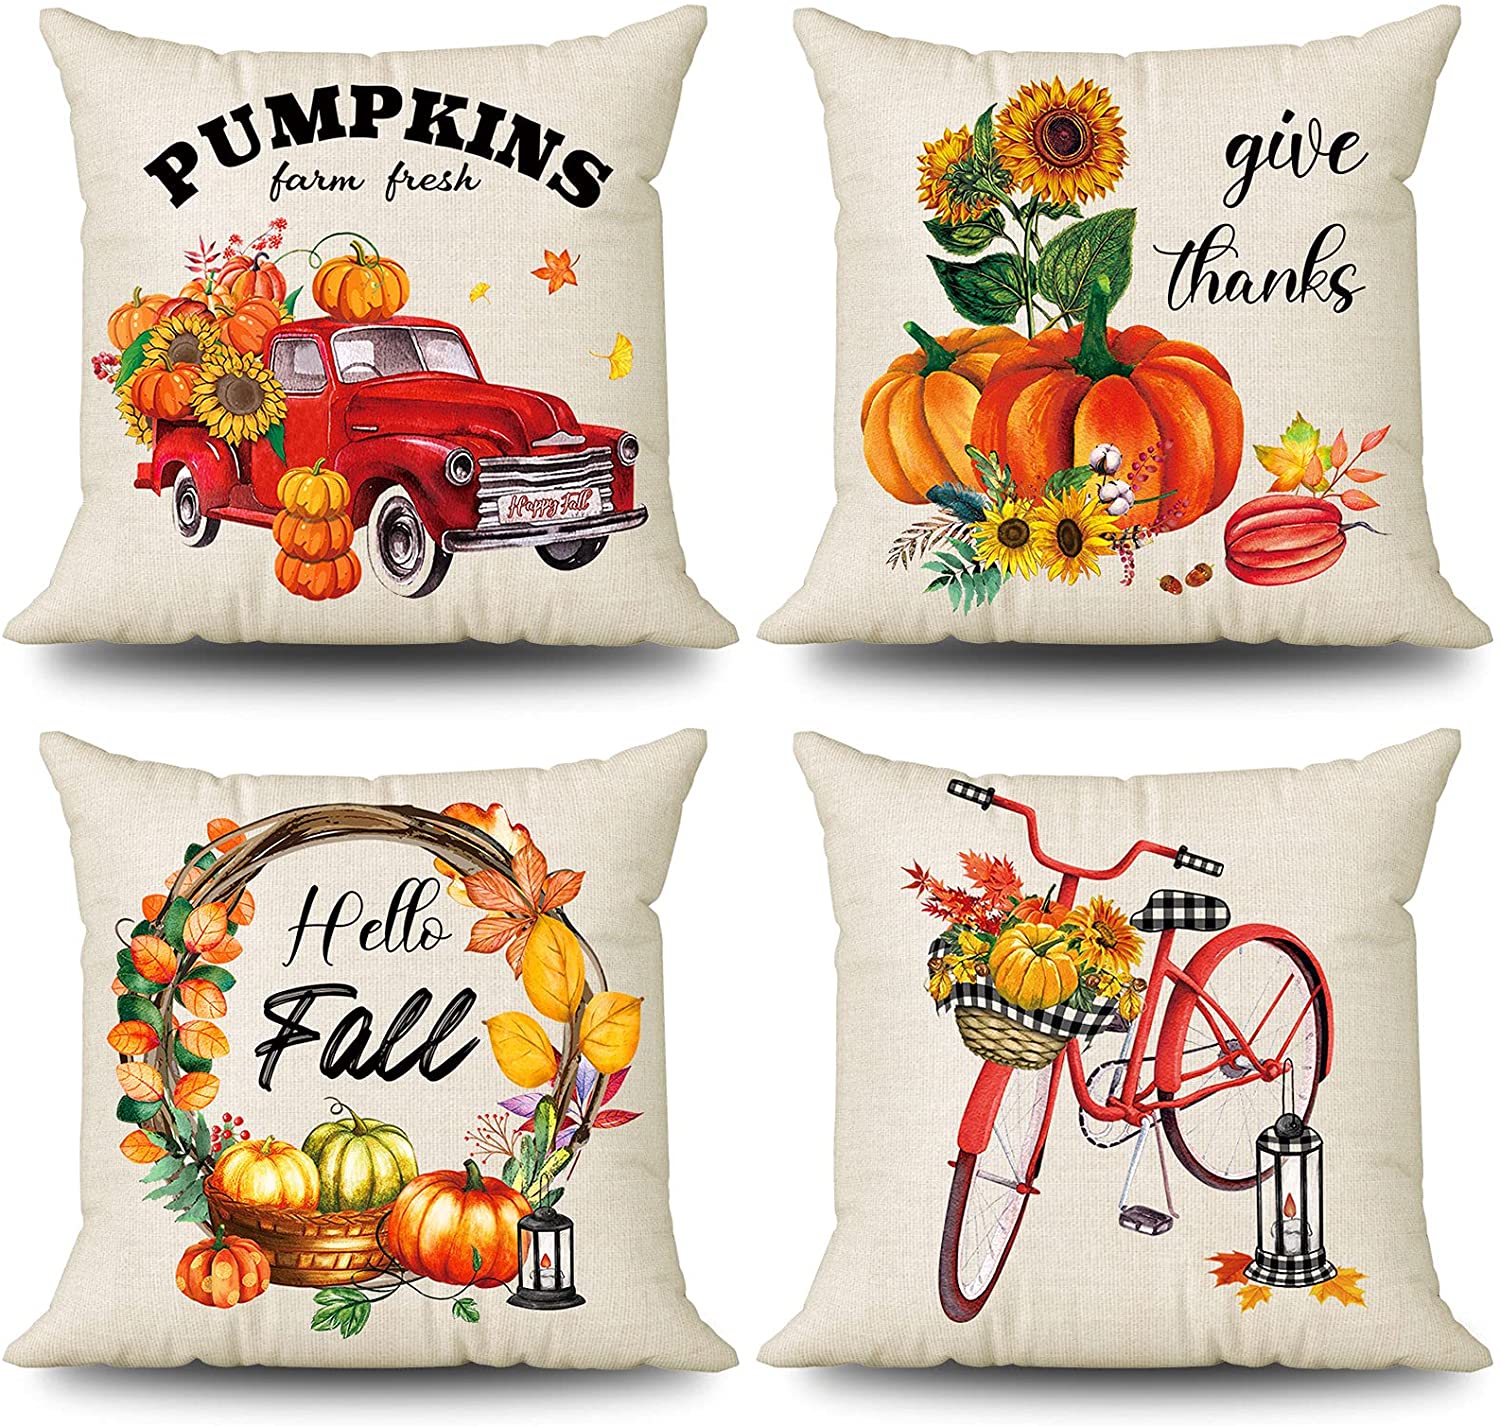 4 Pcs Fall Farmhouse Pillow Covers 18 x 18 (Sunflower, Bicycle)